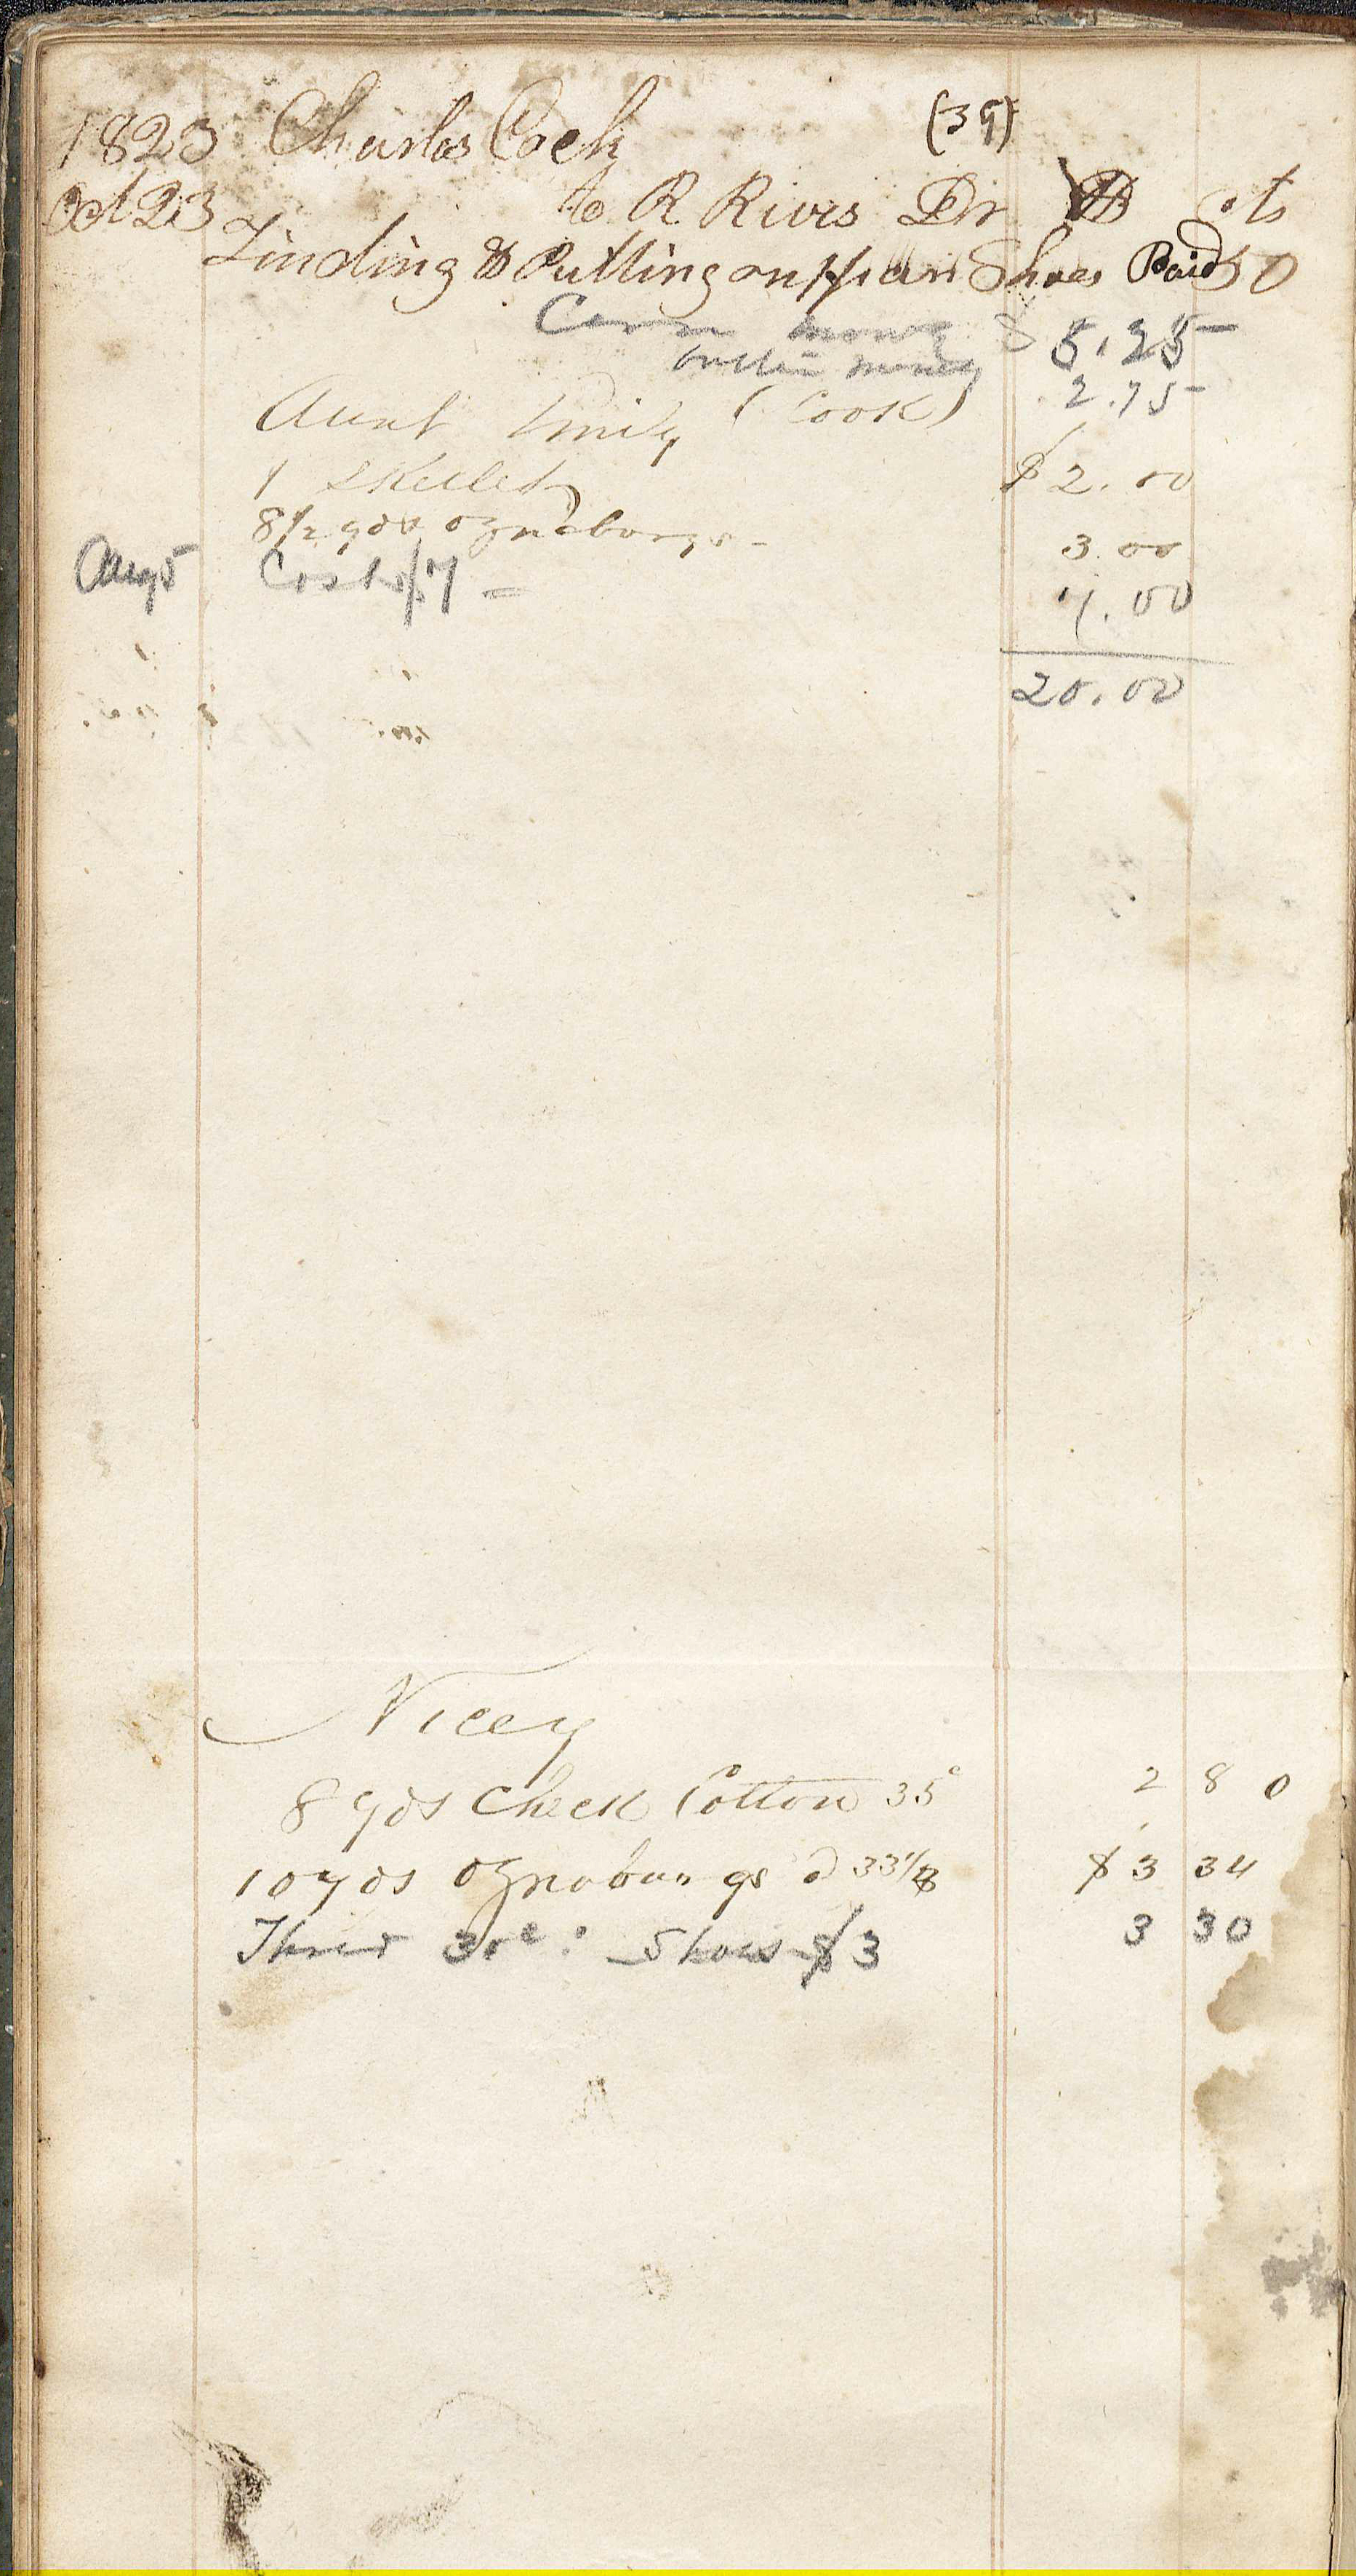 In an account book held by the Special Collections Library Rives purchases   8 yards of check cotton and 10 yards of Osnaburg  fabric for Nicey  for $6.14. On the opposite page of  Nicey's entry is written the name Isham and under the name "suit of clothes $18.00. The entry dates listed on 1823 but the entry was to have been made much later. Most likely sometime in the 1840's Robert Rives Blacksmith Shop Account Book, 1823; 1843-1846, Accession #4655 (Image by Regina Rush)